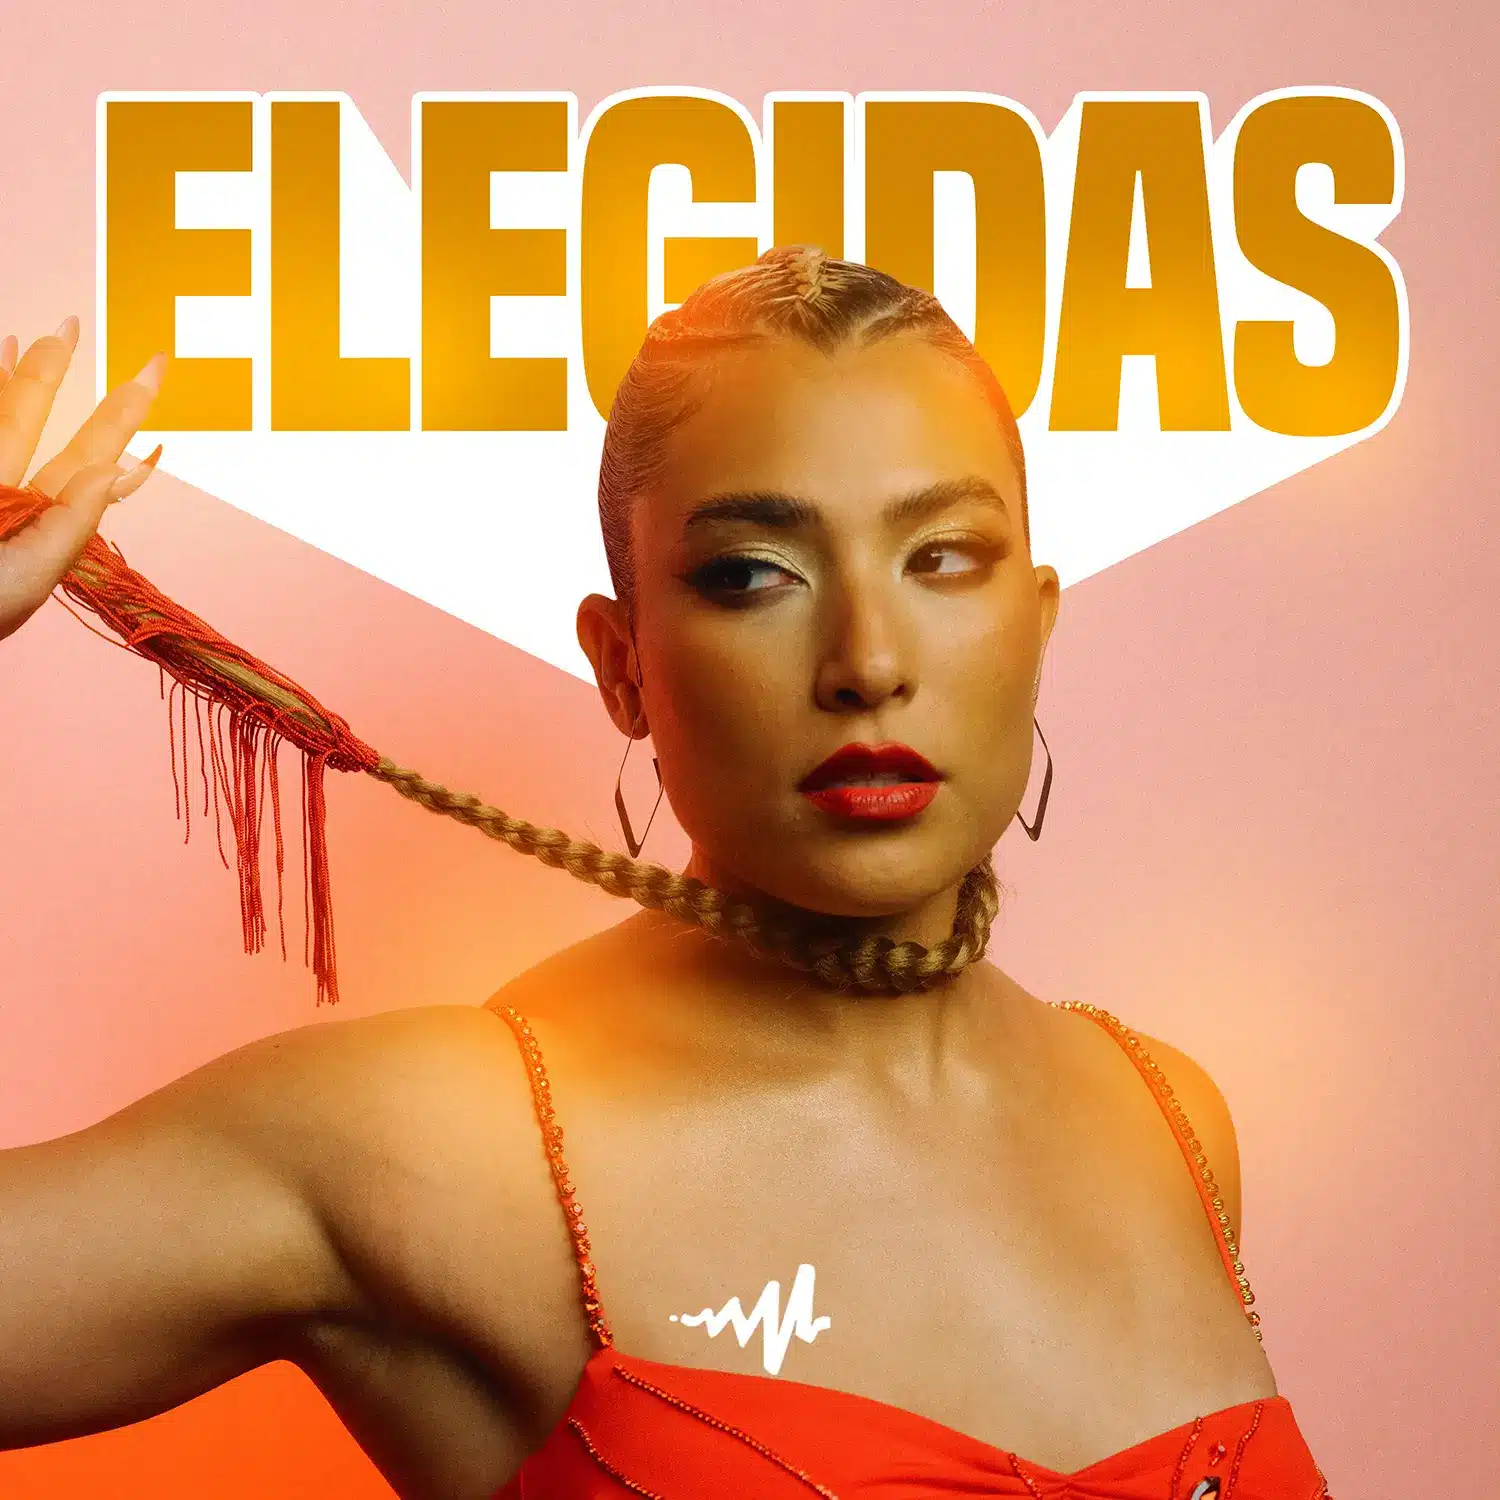 The cover of elegidas, featuring a woman in a red dress for a Grace Gaustad case study.